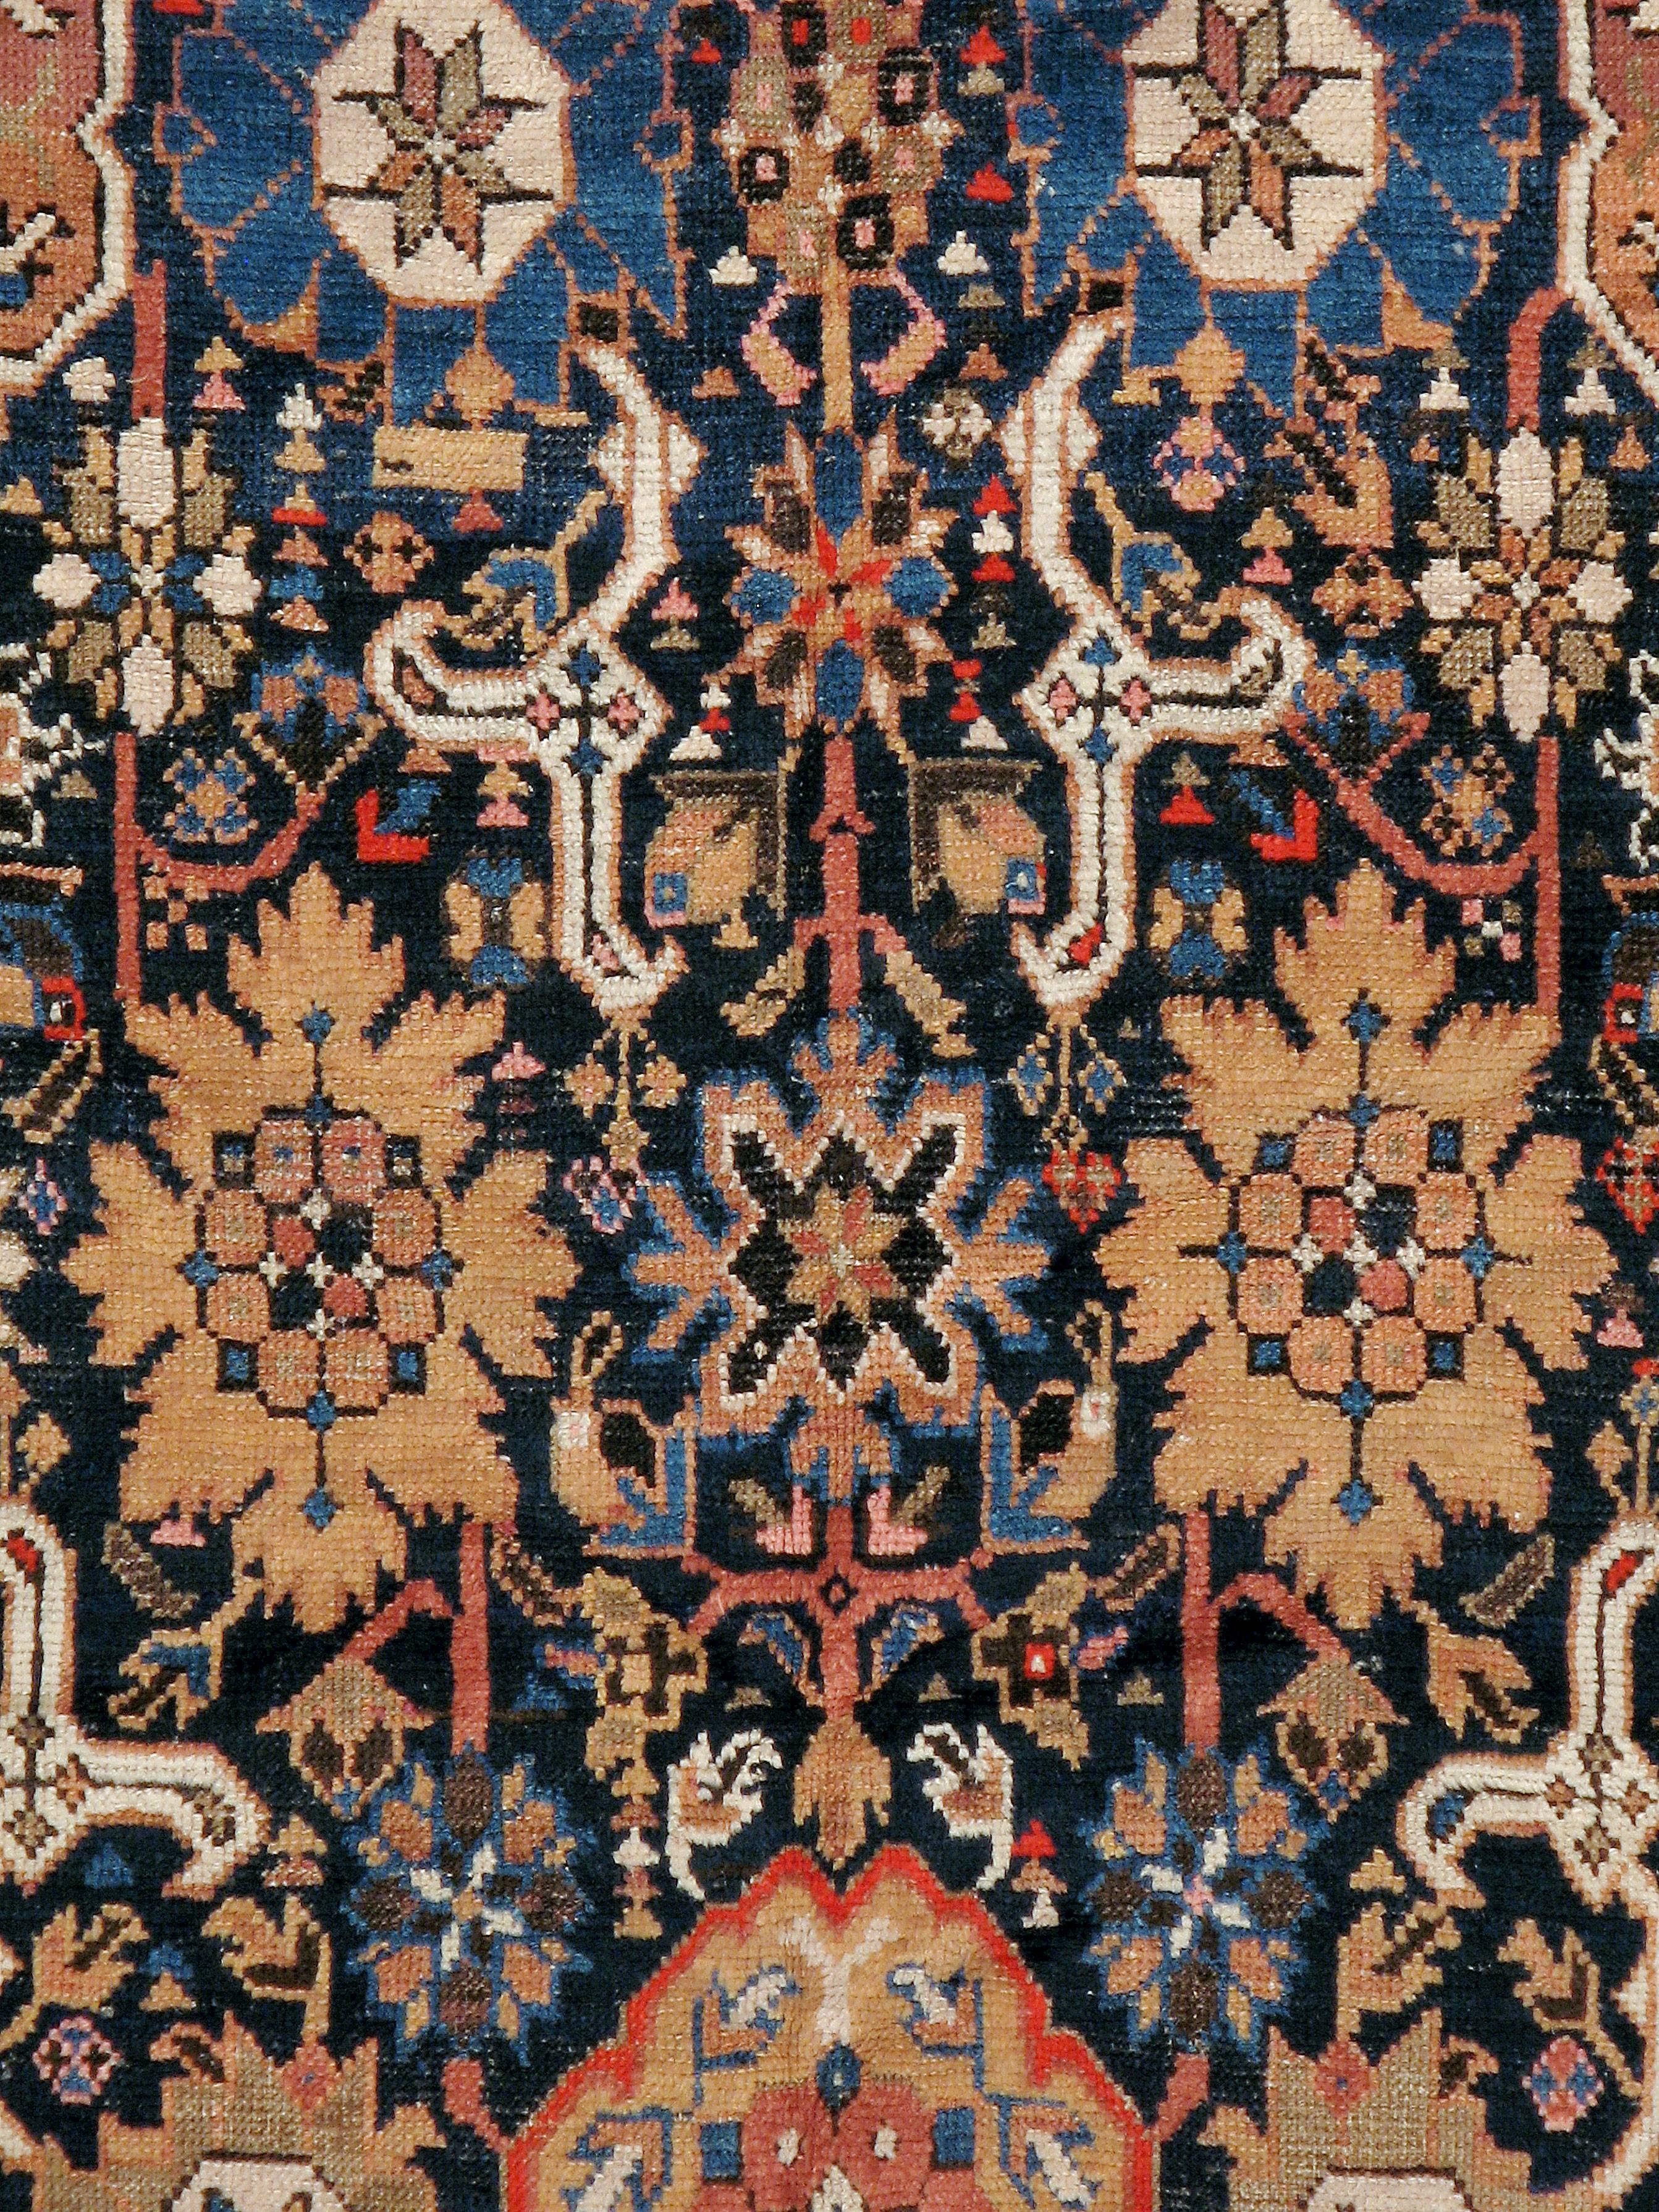 Hand-Woven Anitque Persian North West Rug